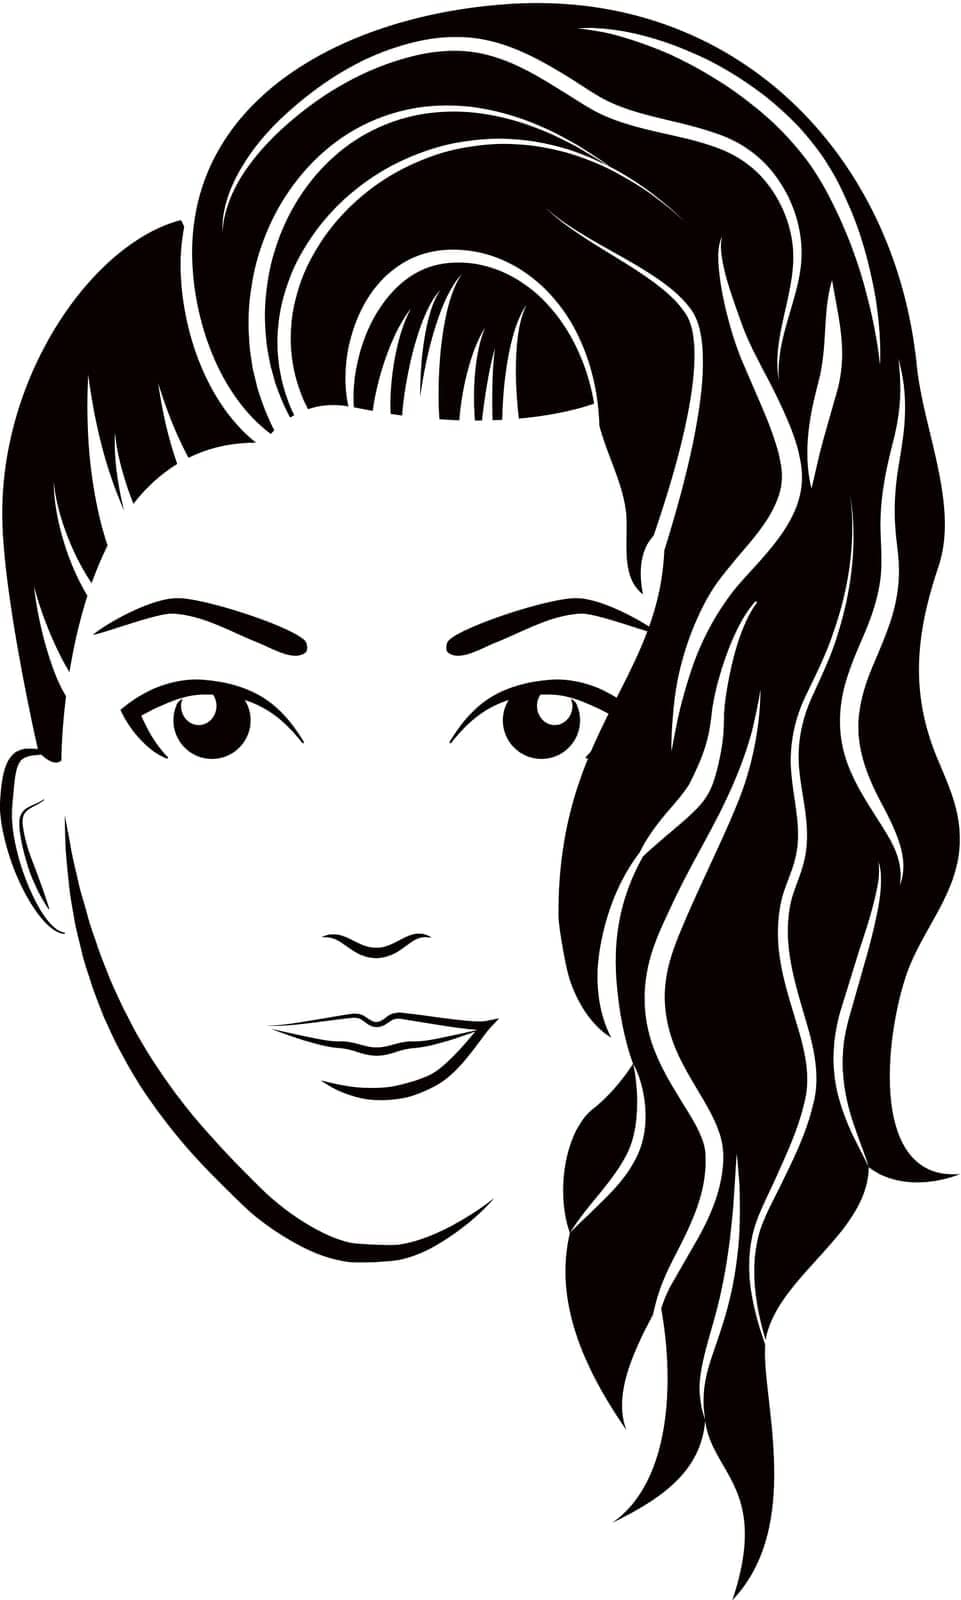 Woman head with curly hairstyle by Lembergvector